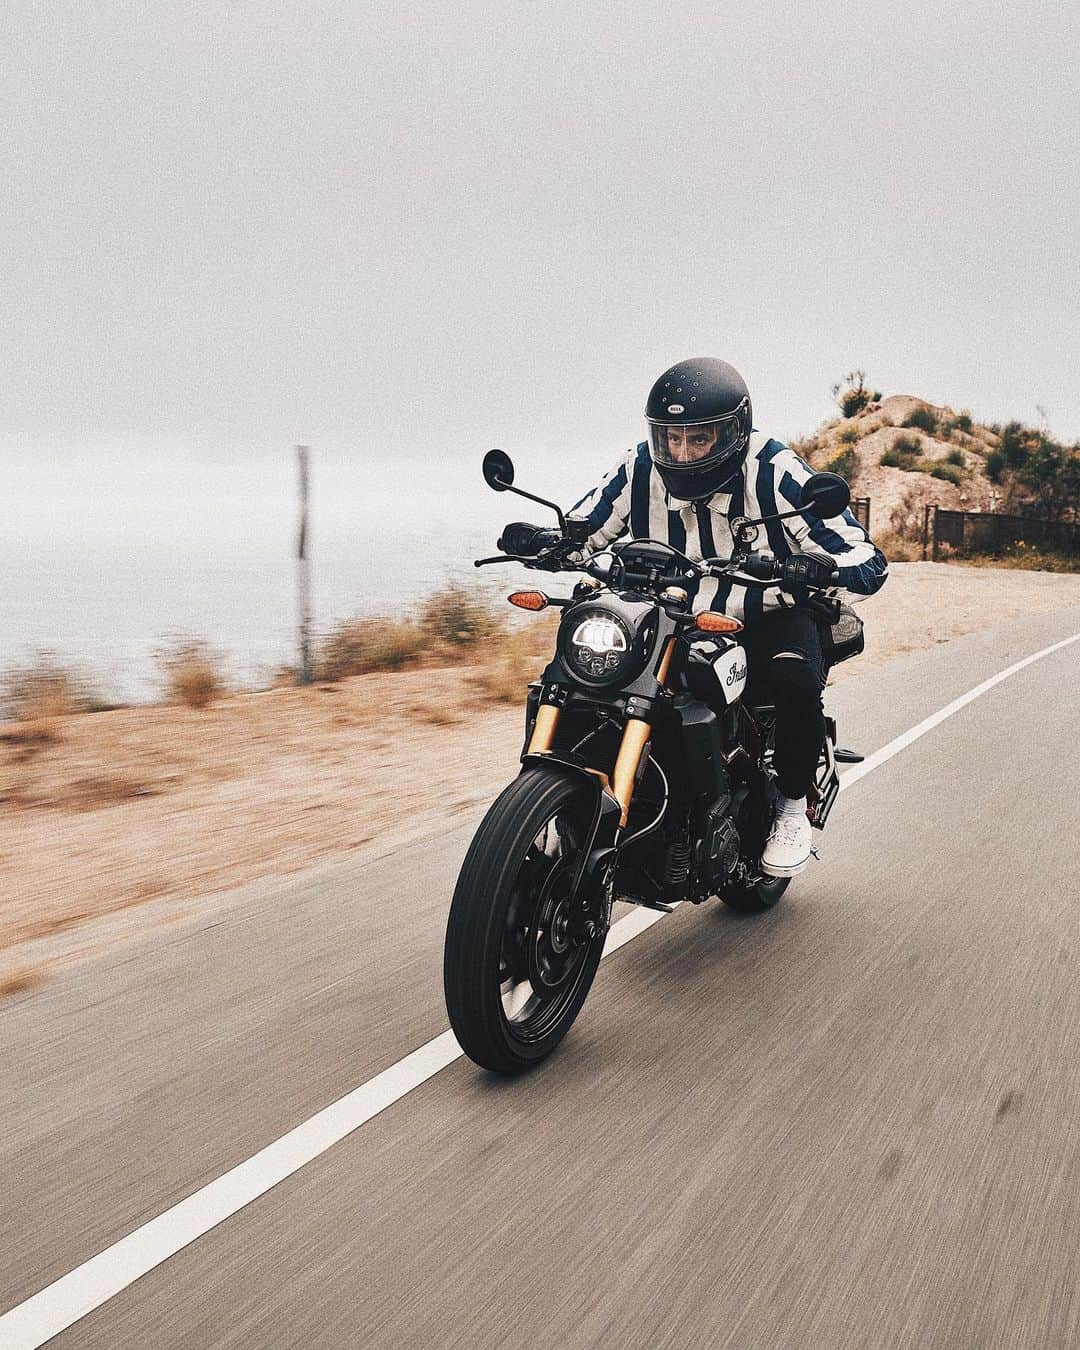 Mark Dohnerのインスタグラム：「always livin’ life on the edge... this time it’s the edge of the road 🏍 one of my favorite hobbies, what are some of yours? @indianmotorcycle #FTR1200」